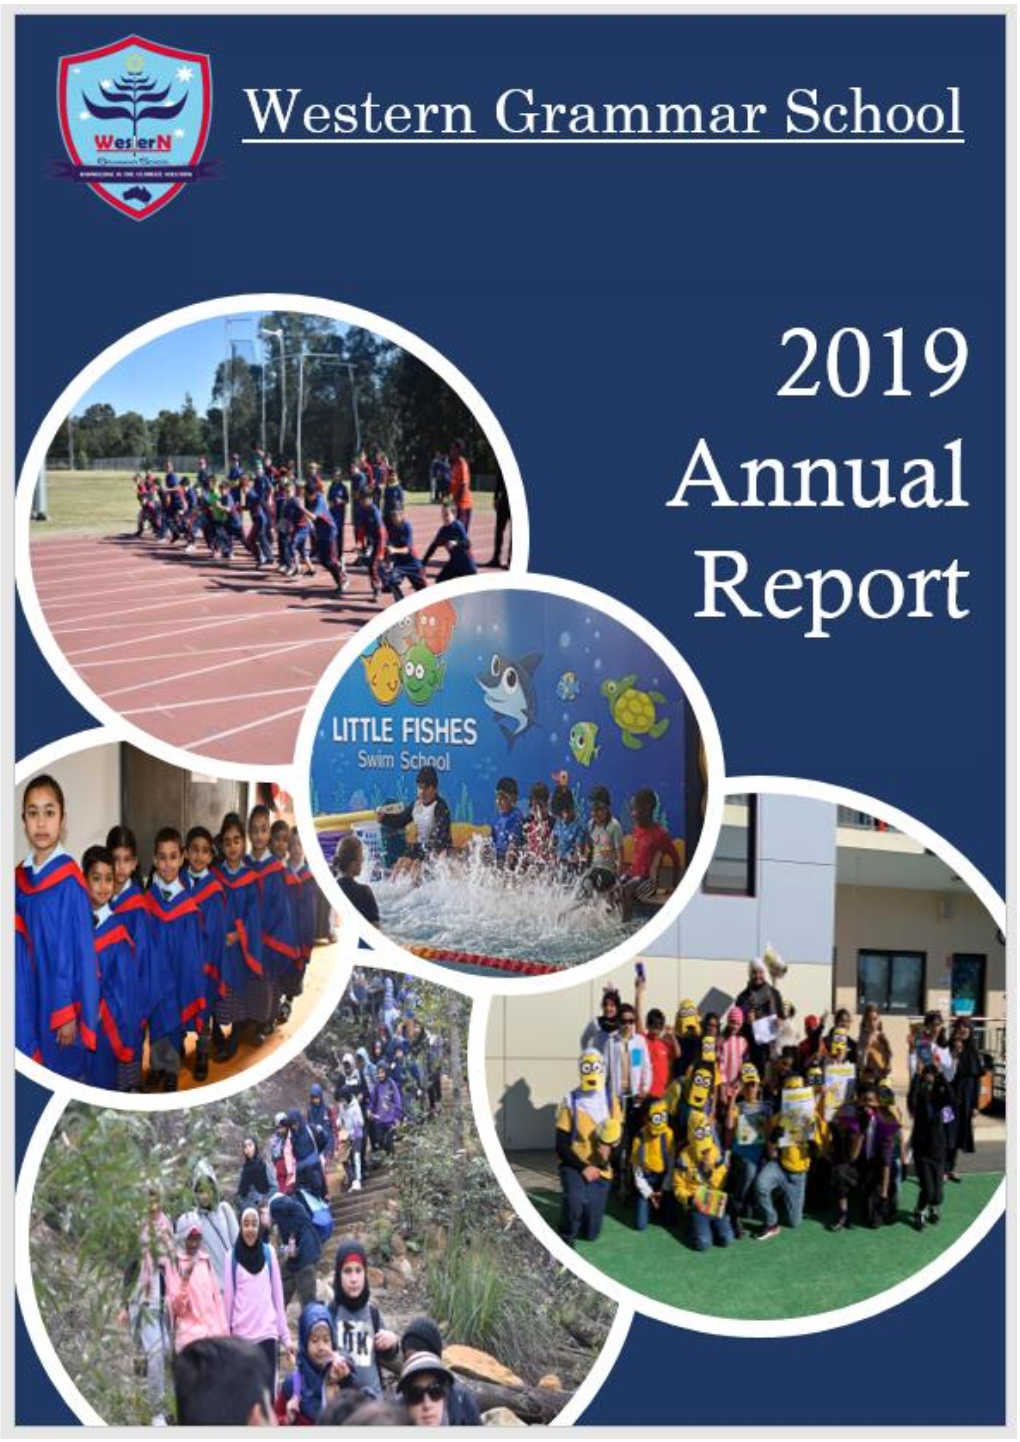 WGS ANNUAL REPORT 2019 Page 1 of 40